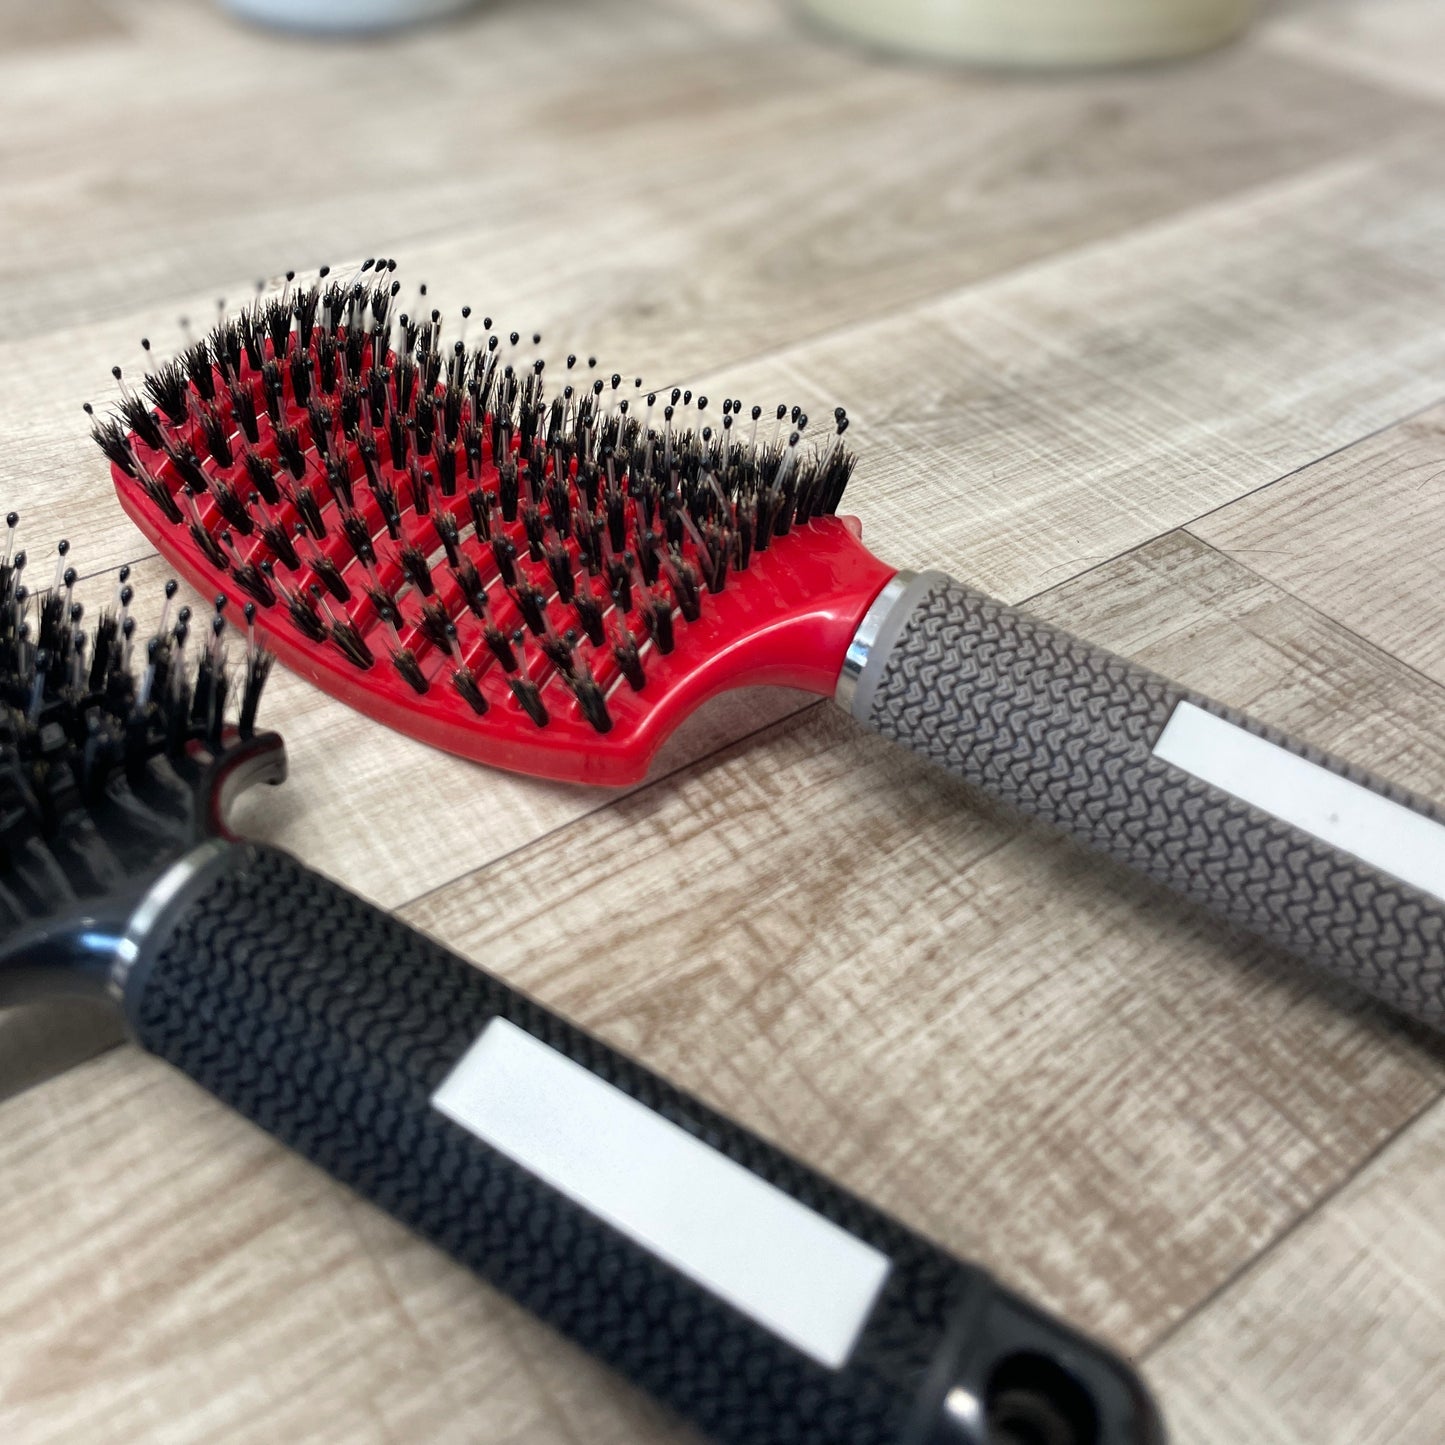 Load image into Gallery viewer, Buy Red Hair Brush - House Of Hair New Zealand Haircare
